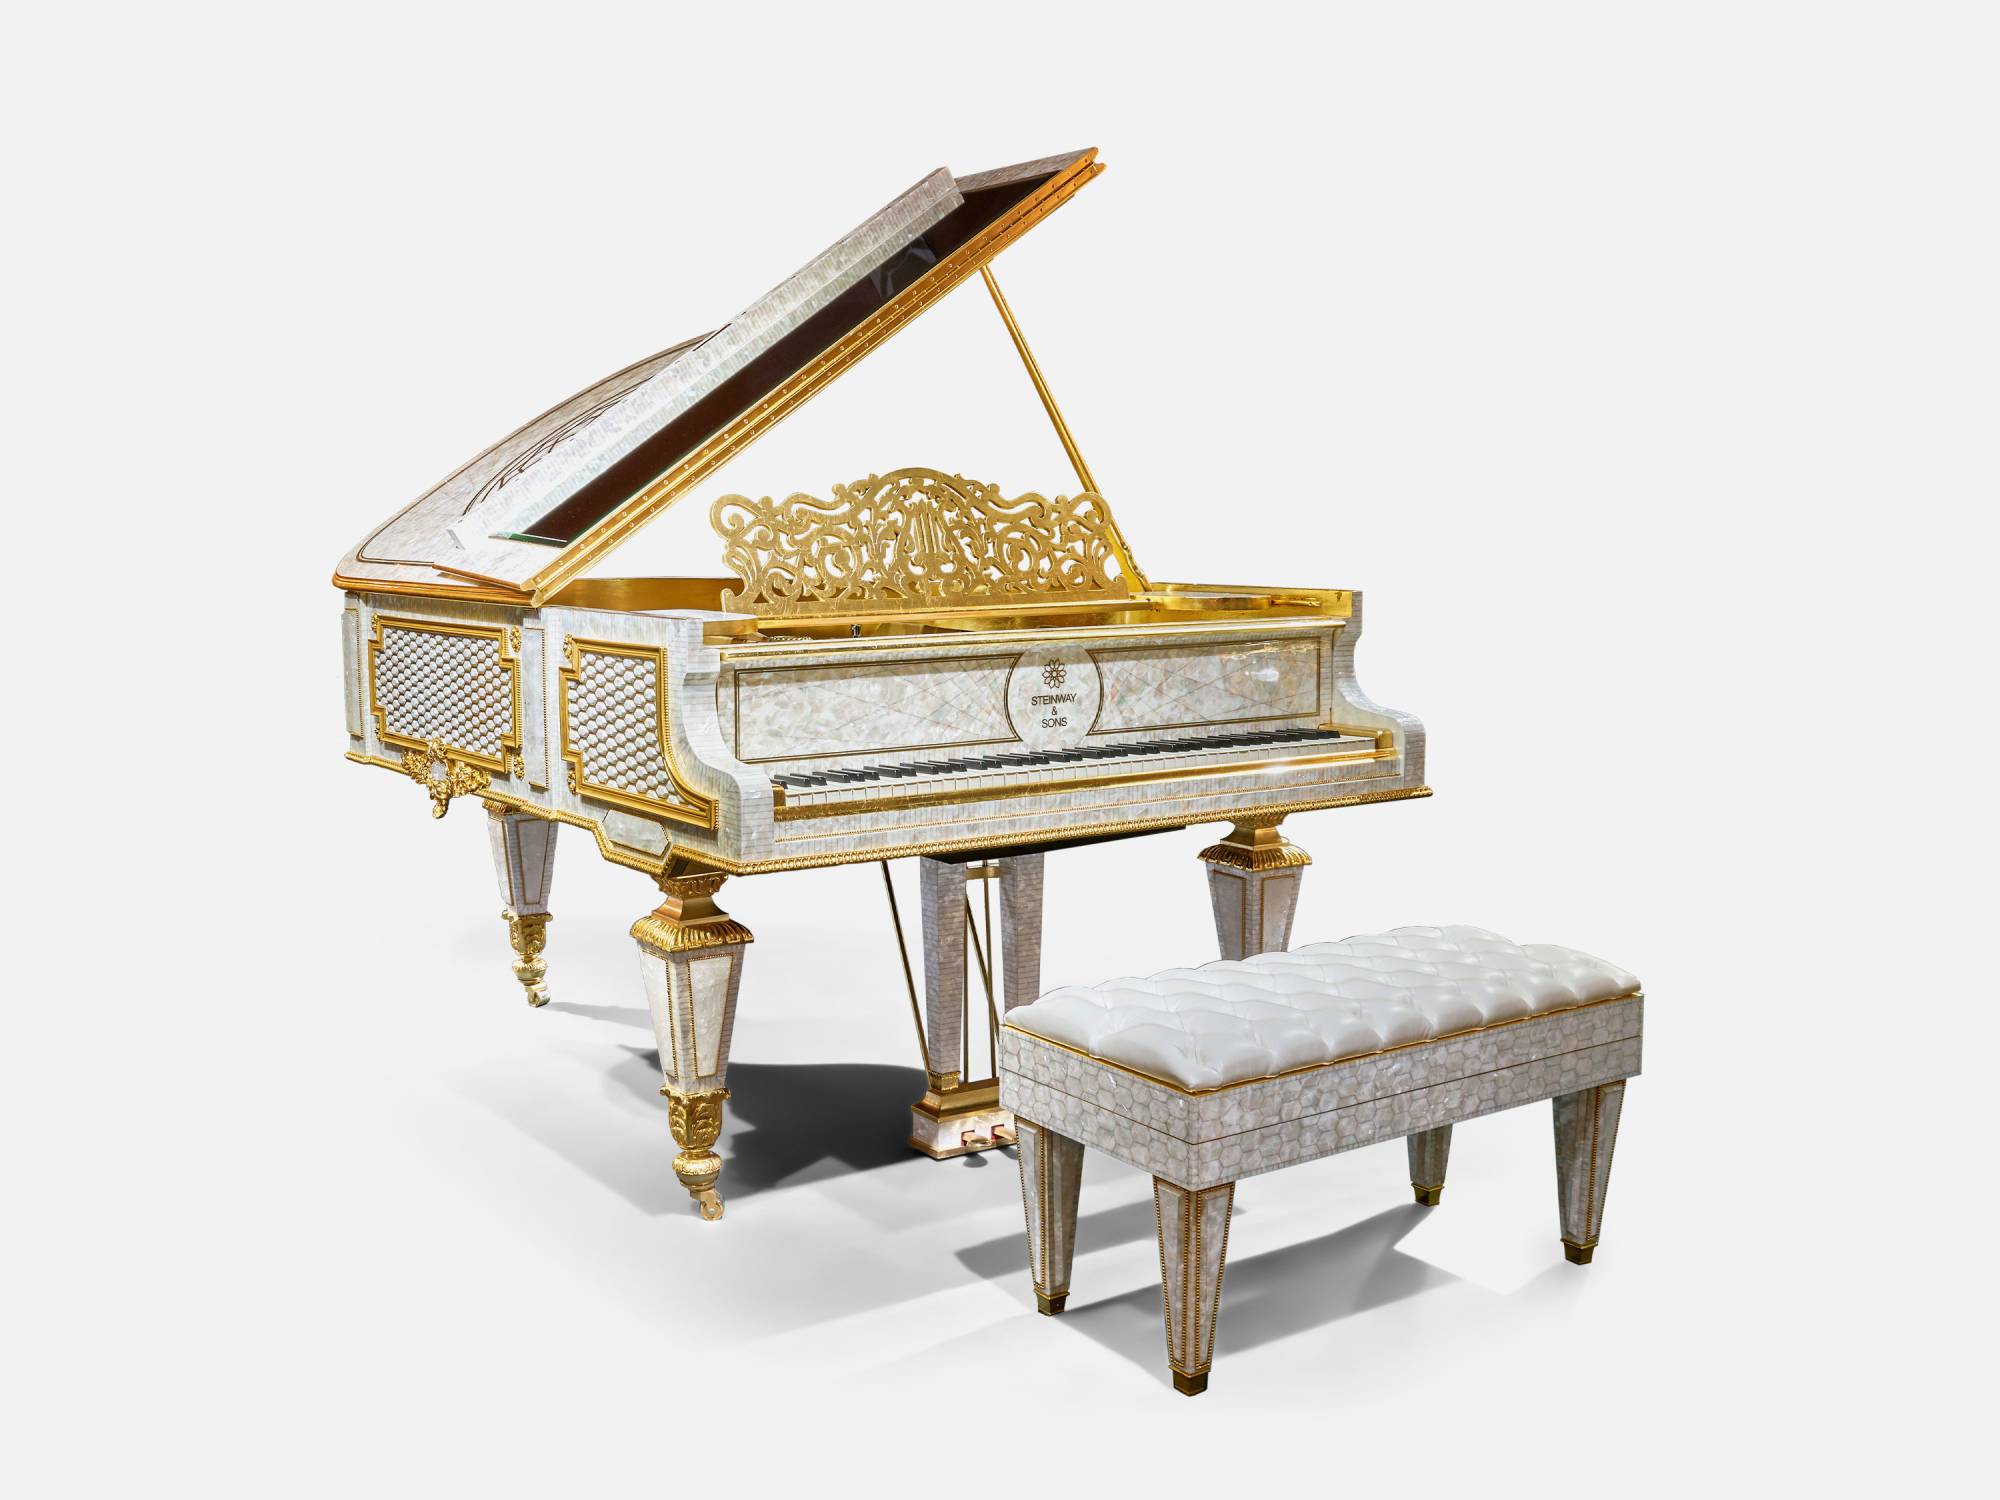 ART. 2728 – C.G. Capelletti Italian Luxury Classic Pianos. Transform your space with sophisticated made in italy classic interior design.